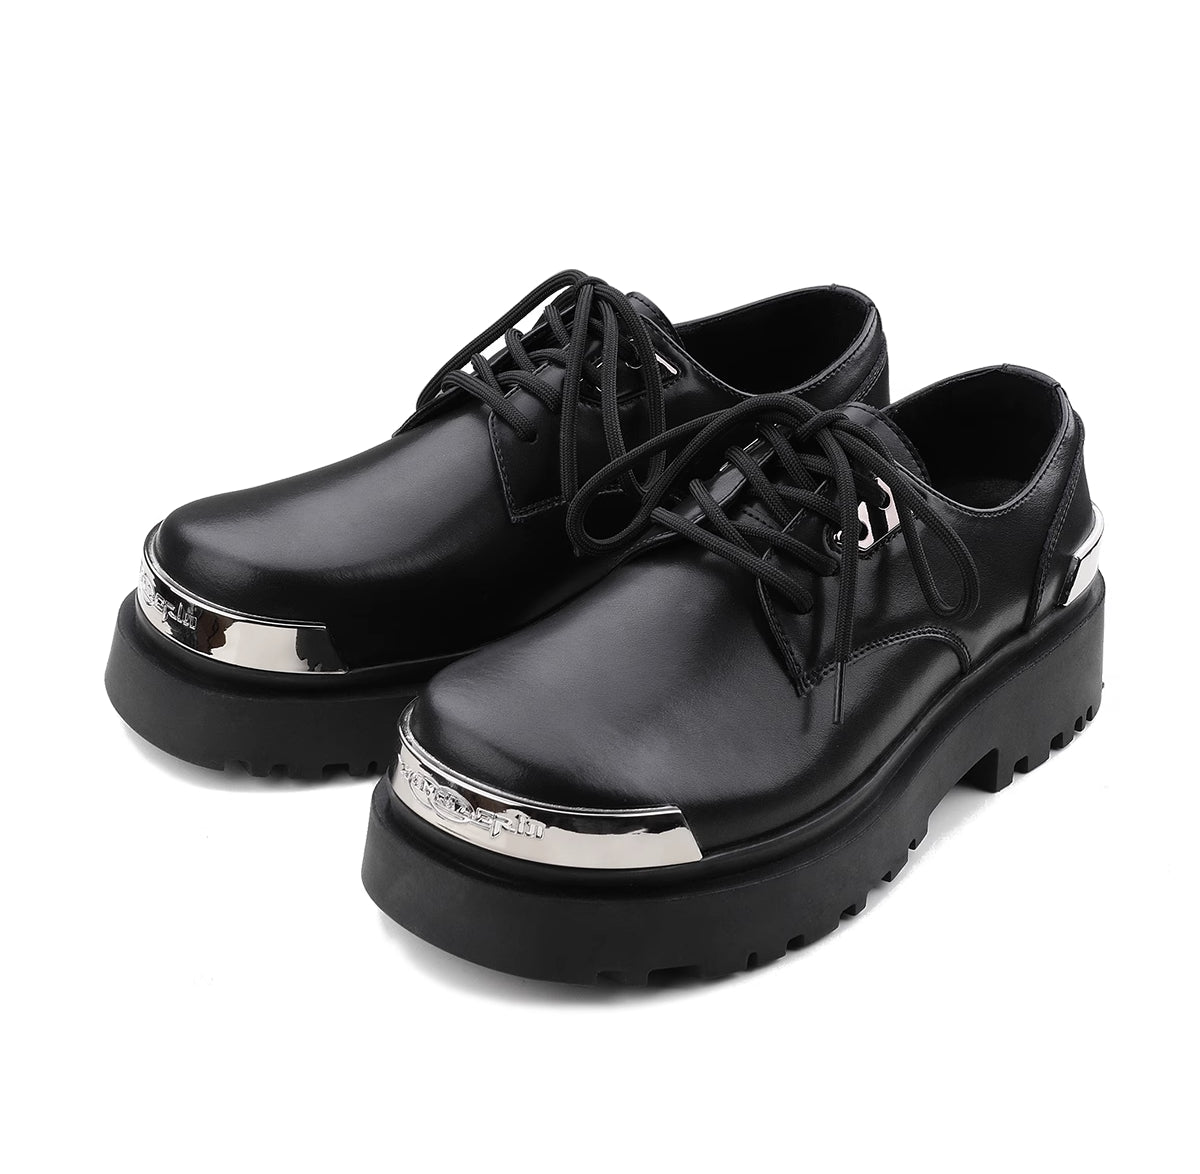 【New】Round and Big Toe Platform Leather Shoes